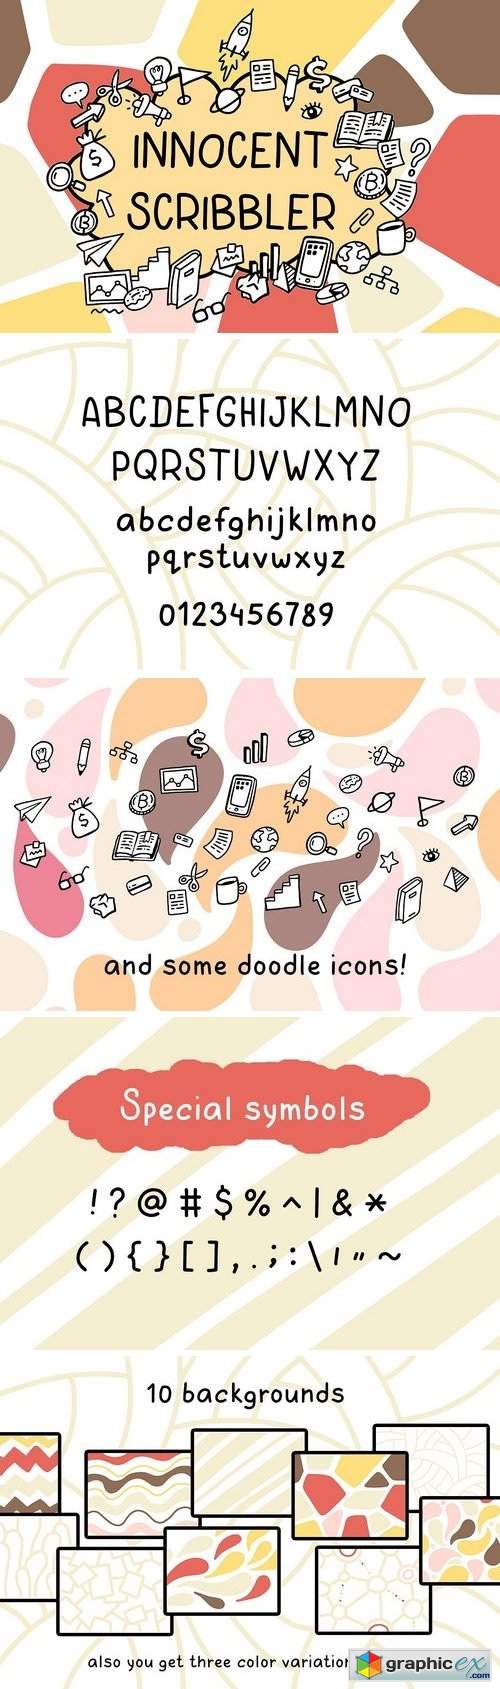 Innocent scribbler with doodle icons